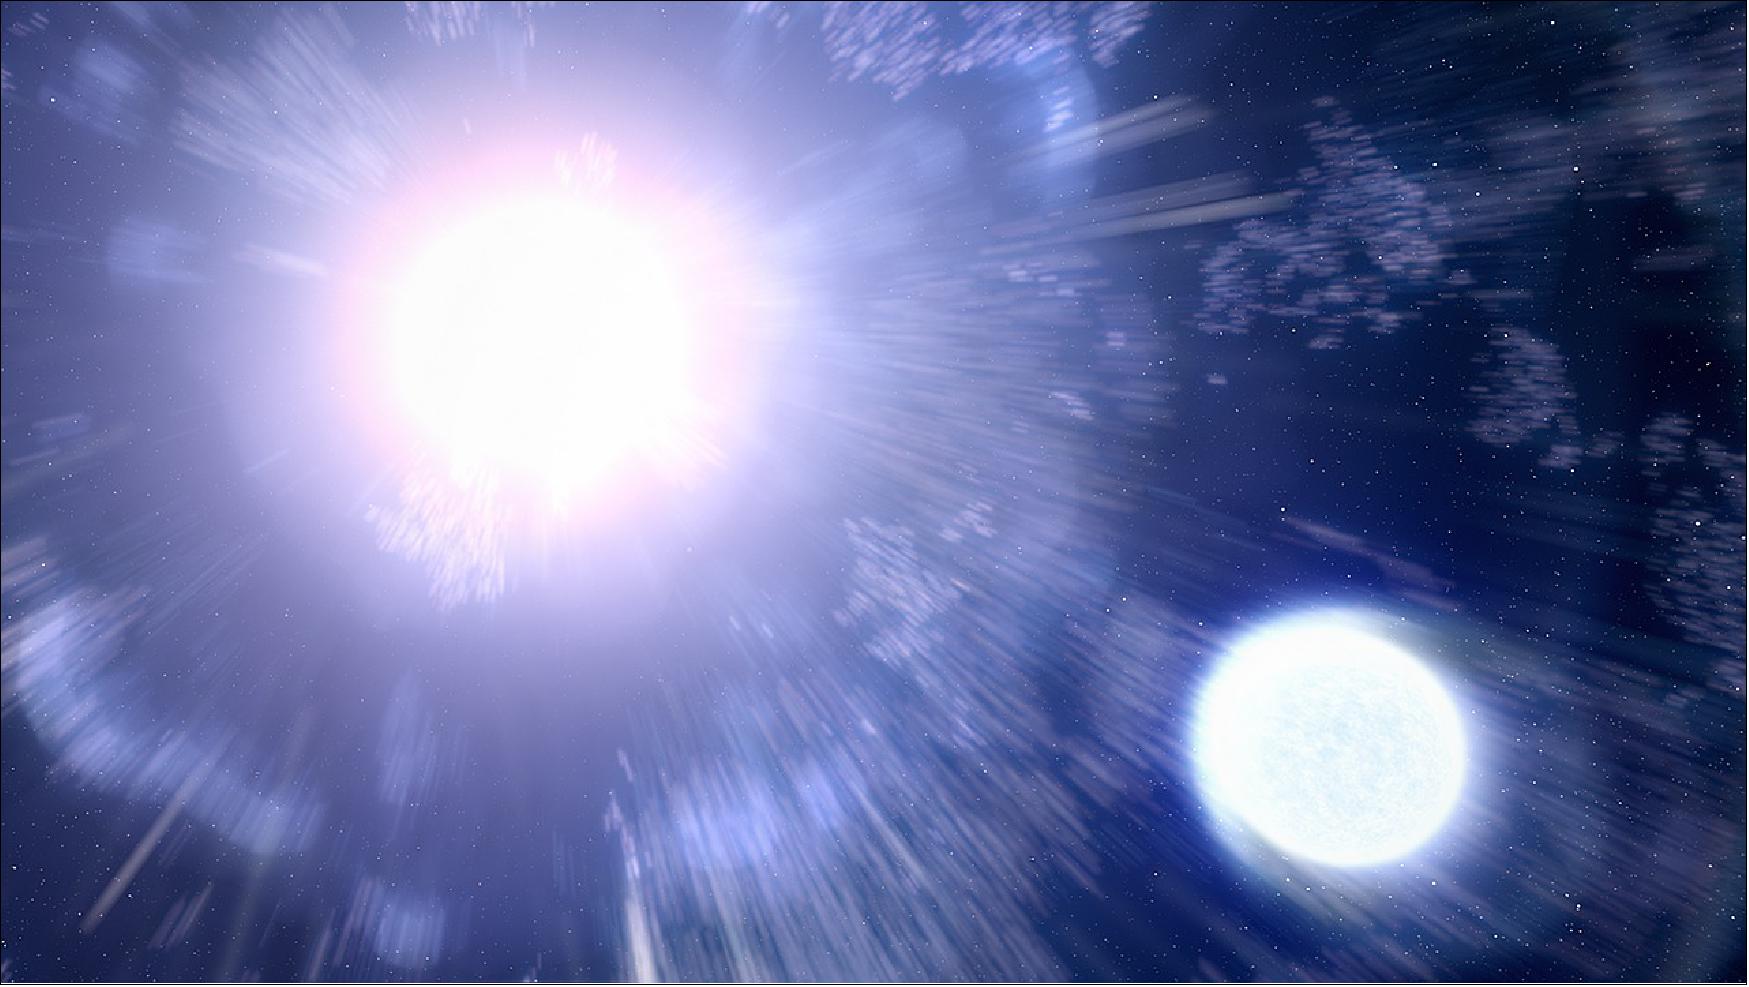 Figure 47: This artist's illustration shows supernova 2013ge, with its companion star at lower right. The companion star is impacted by the blast wave from the supernova, but not destroyed. Over time astronomers observed the ultraviolet (UV) light of the supernova fading, revealing a nearby second source of UV light that maintained brightness. The theory is that the two massive stars evolved together as a binary pair, and that the current survivor siphoned off its partner's outer hydrogen gas shell before it exploded. Eventually, the companion star will also go supernova [image credits: Artwork: NASA, ESA, Leah Hustak (STScI)]